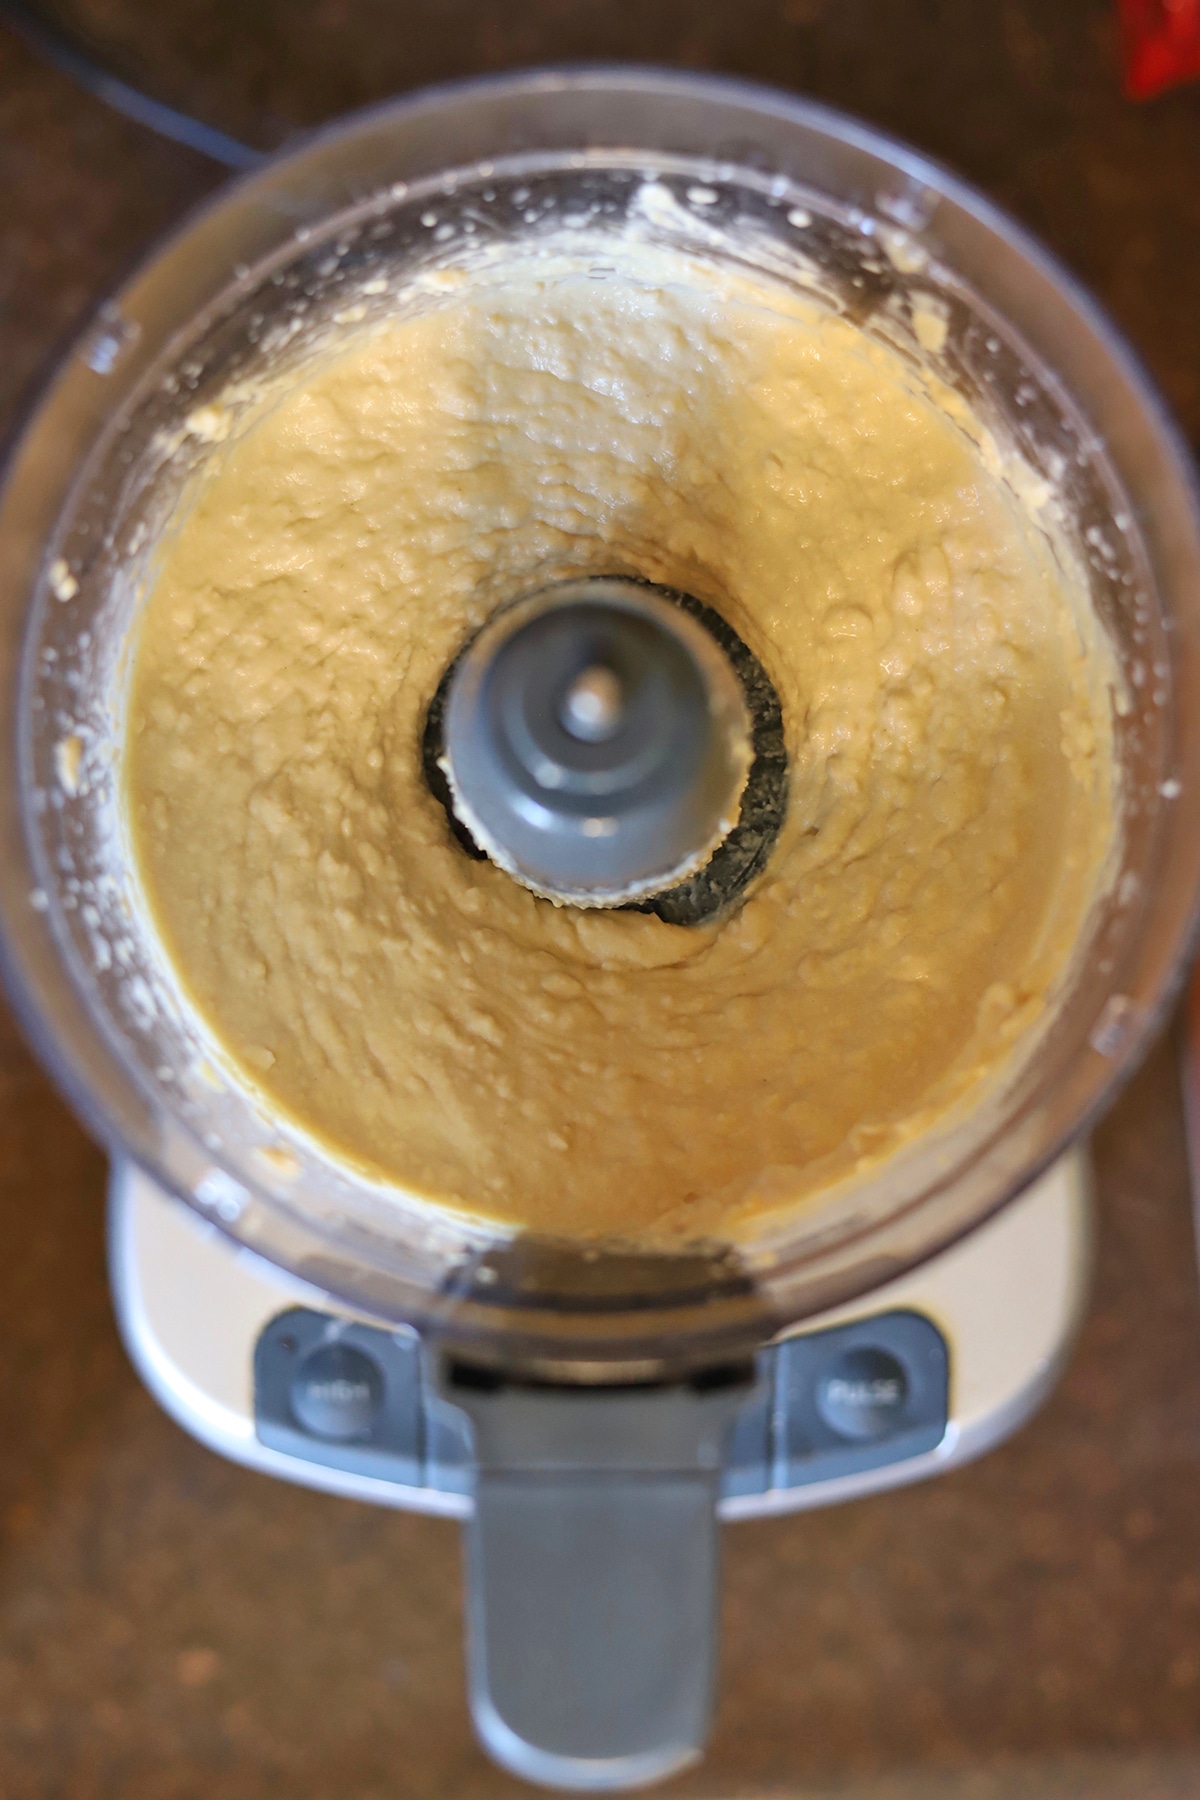 Blended chickpea hummus in food processor.